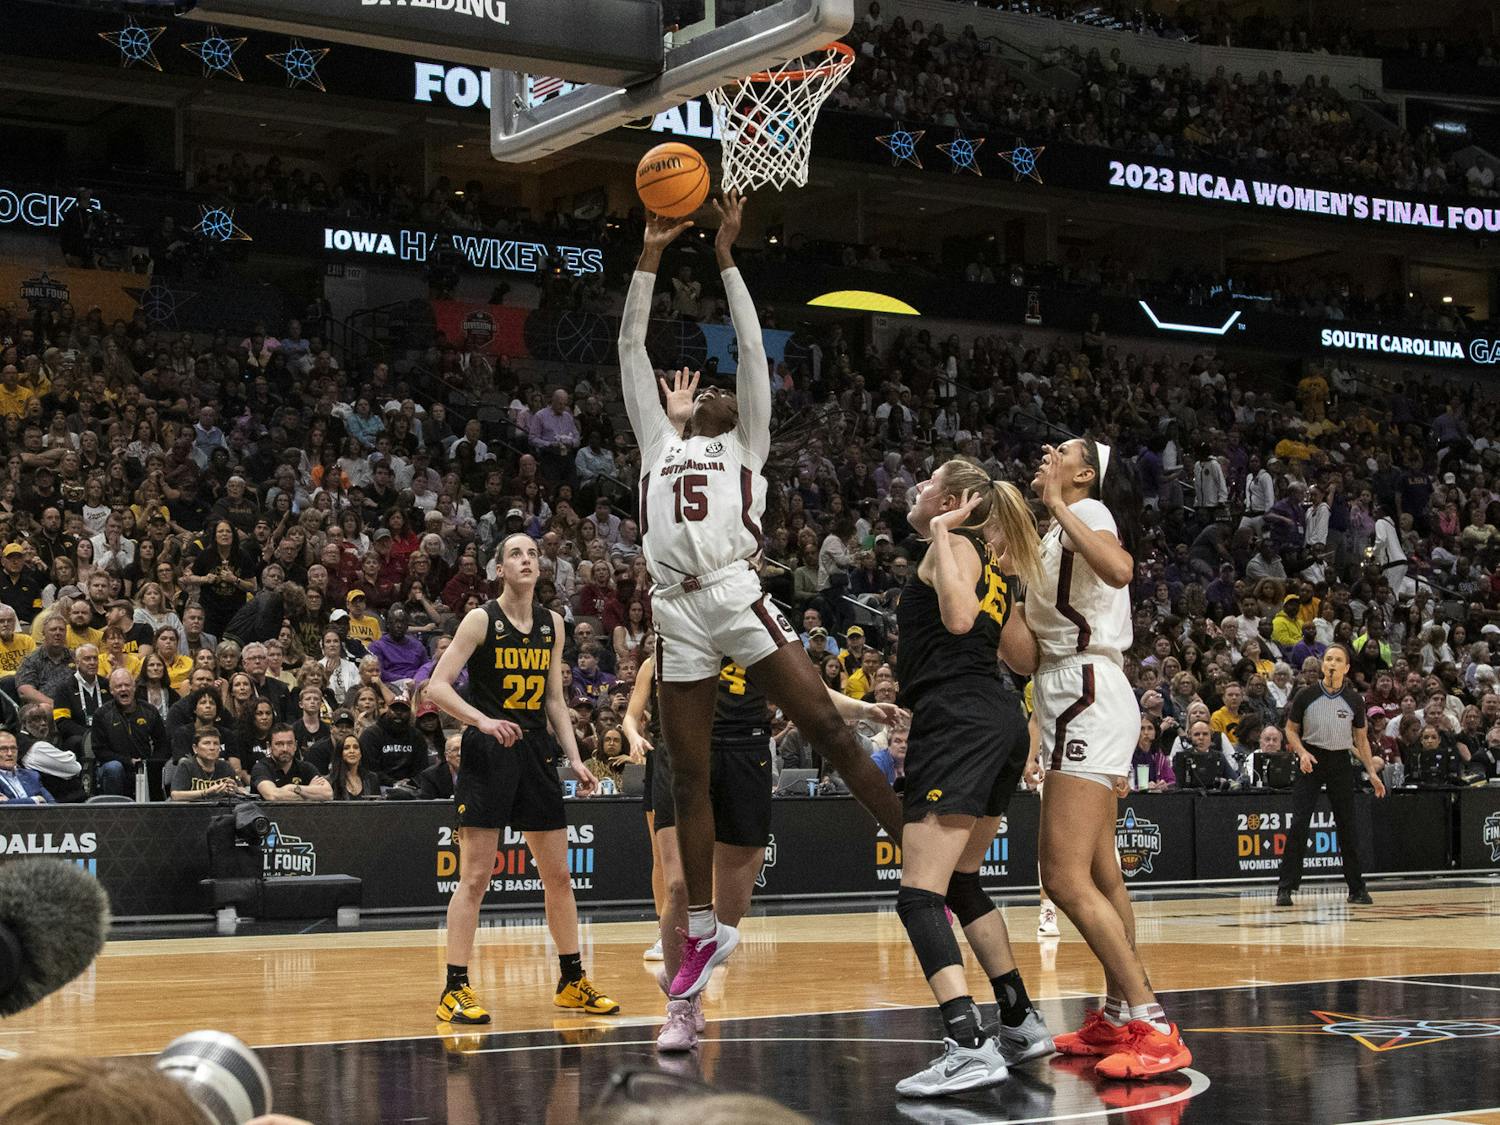 Senior forward Laeticia Amihere attempts a layup during the Women’s Final Four match on March 31, 2023. Amihere added 8 points in her 15 minutes of play to the Gamecocks' 73 points.